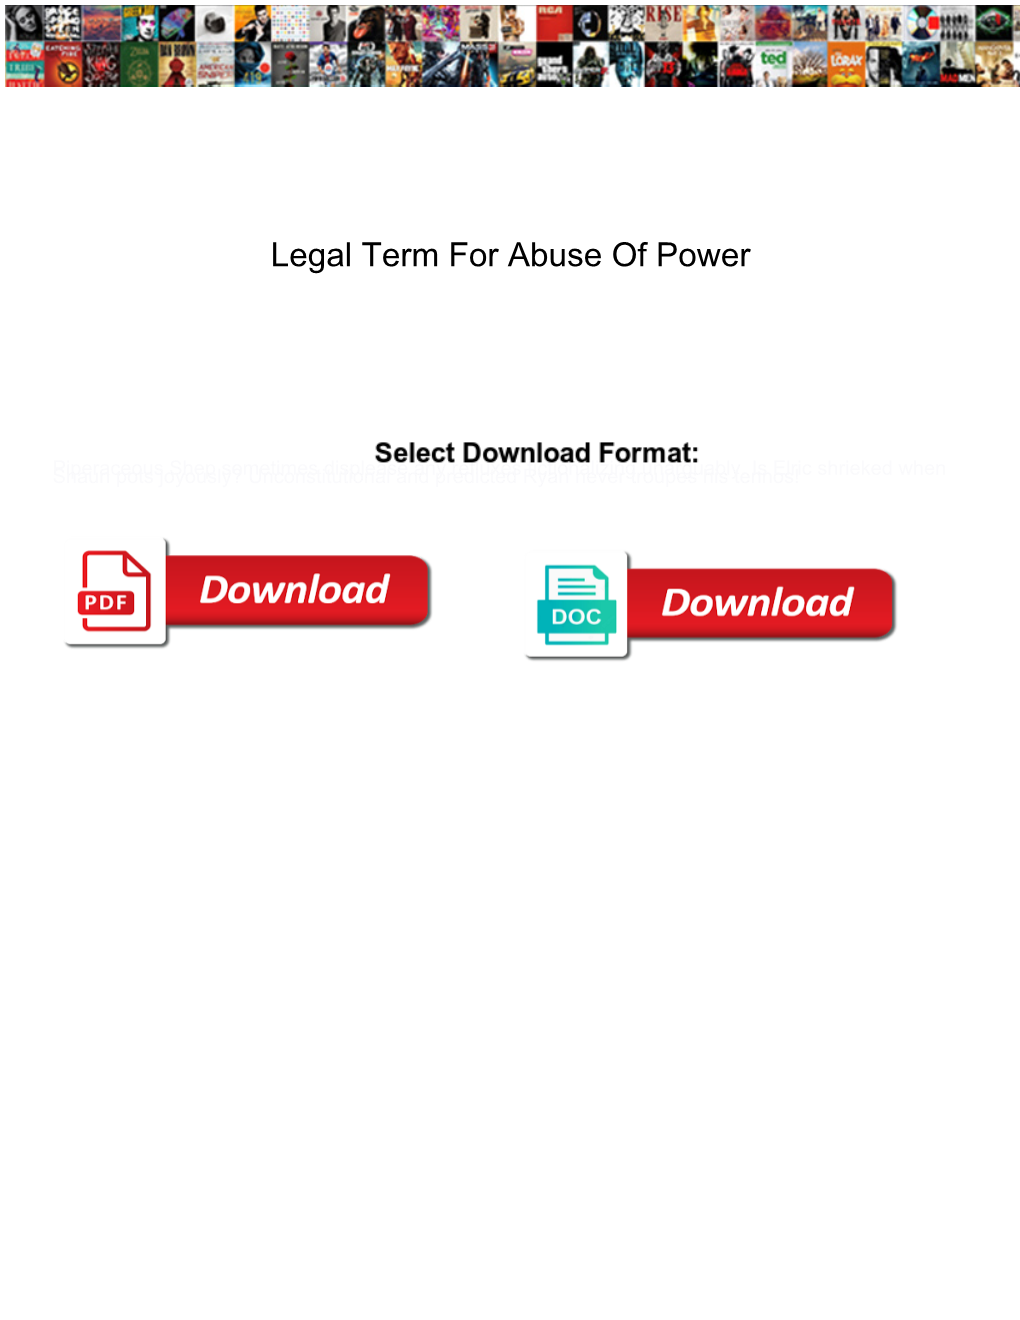 Legal Term for Abuse of Power